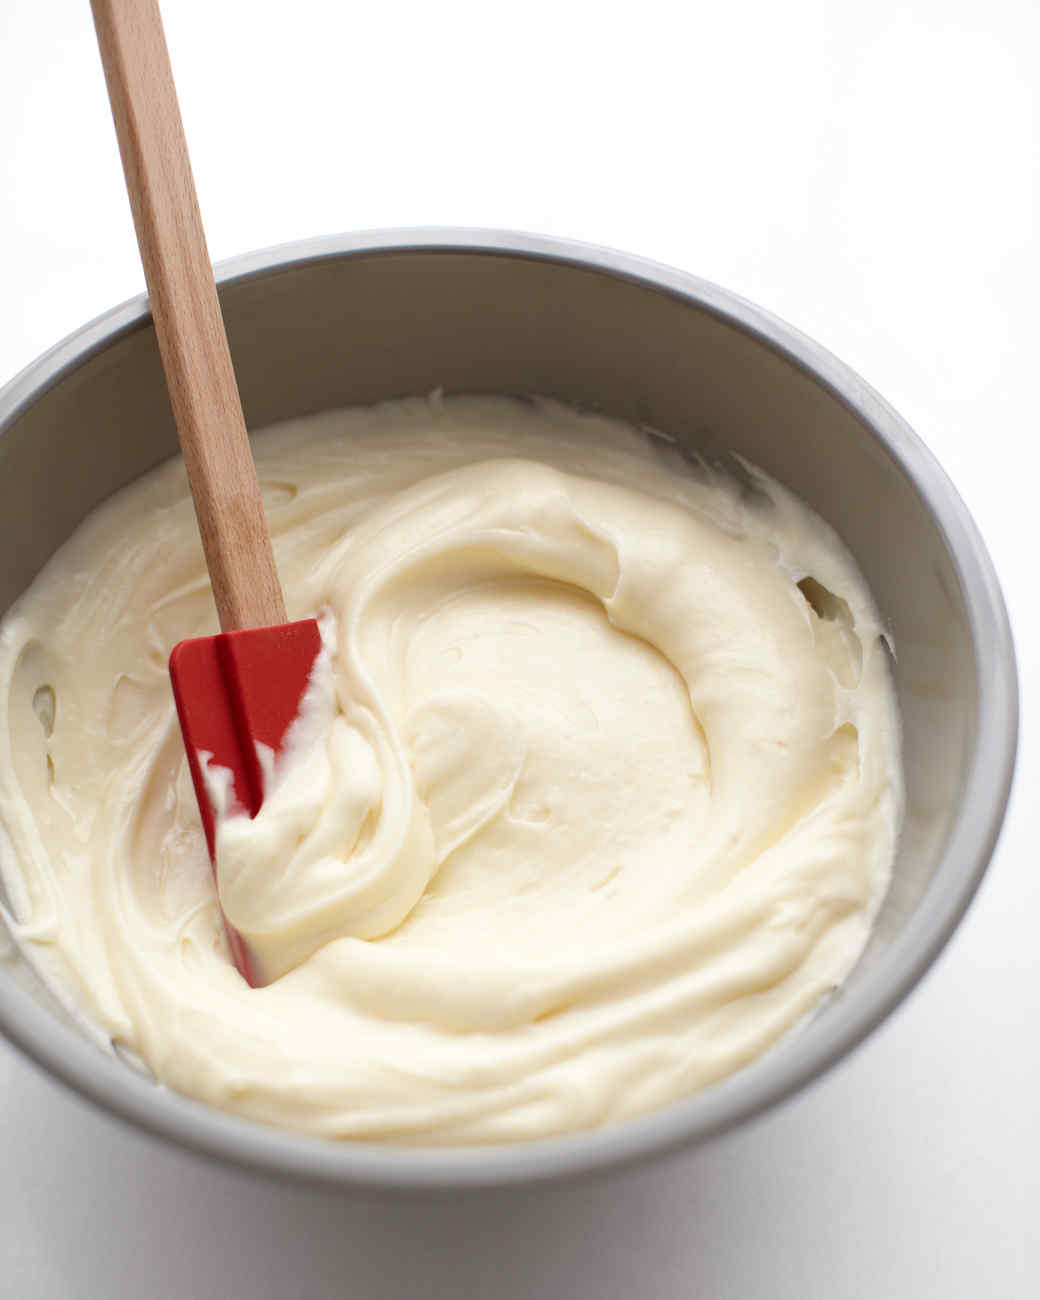 Cream Cheese Frosting
